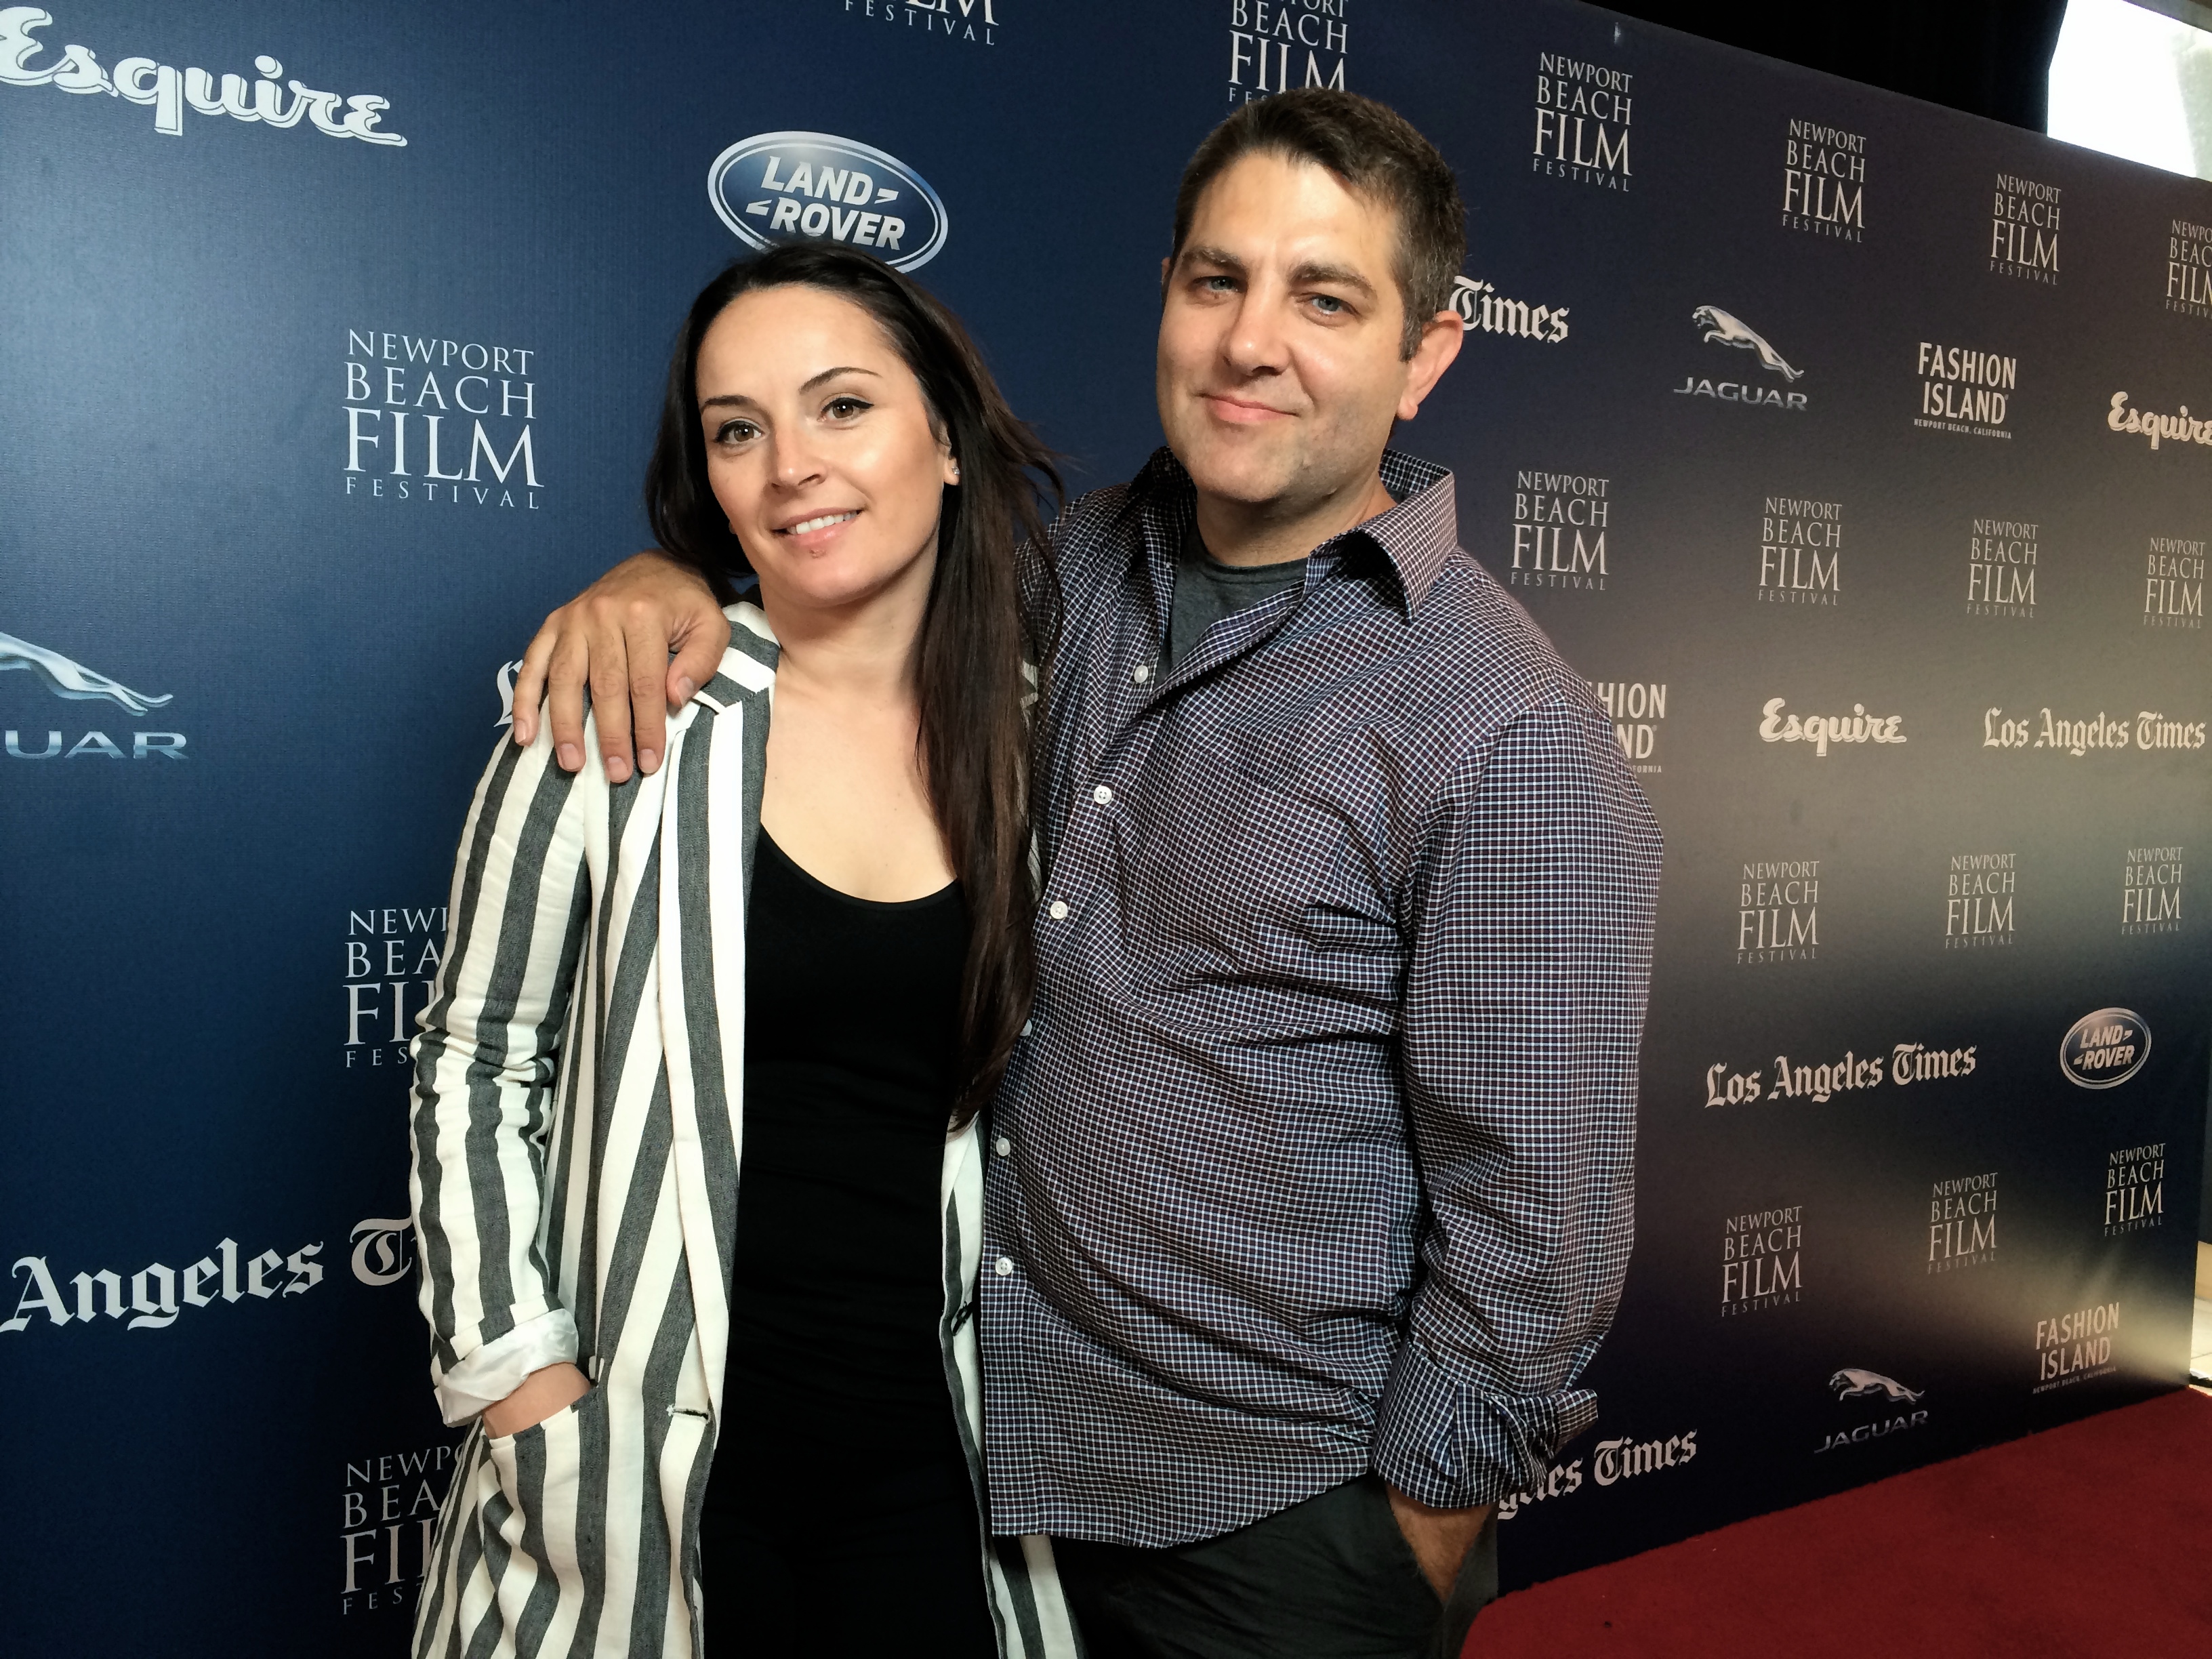 She Comes in Spring Screening at Newport Beach Film Festival